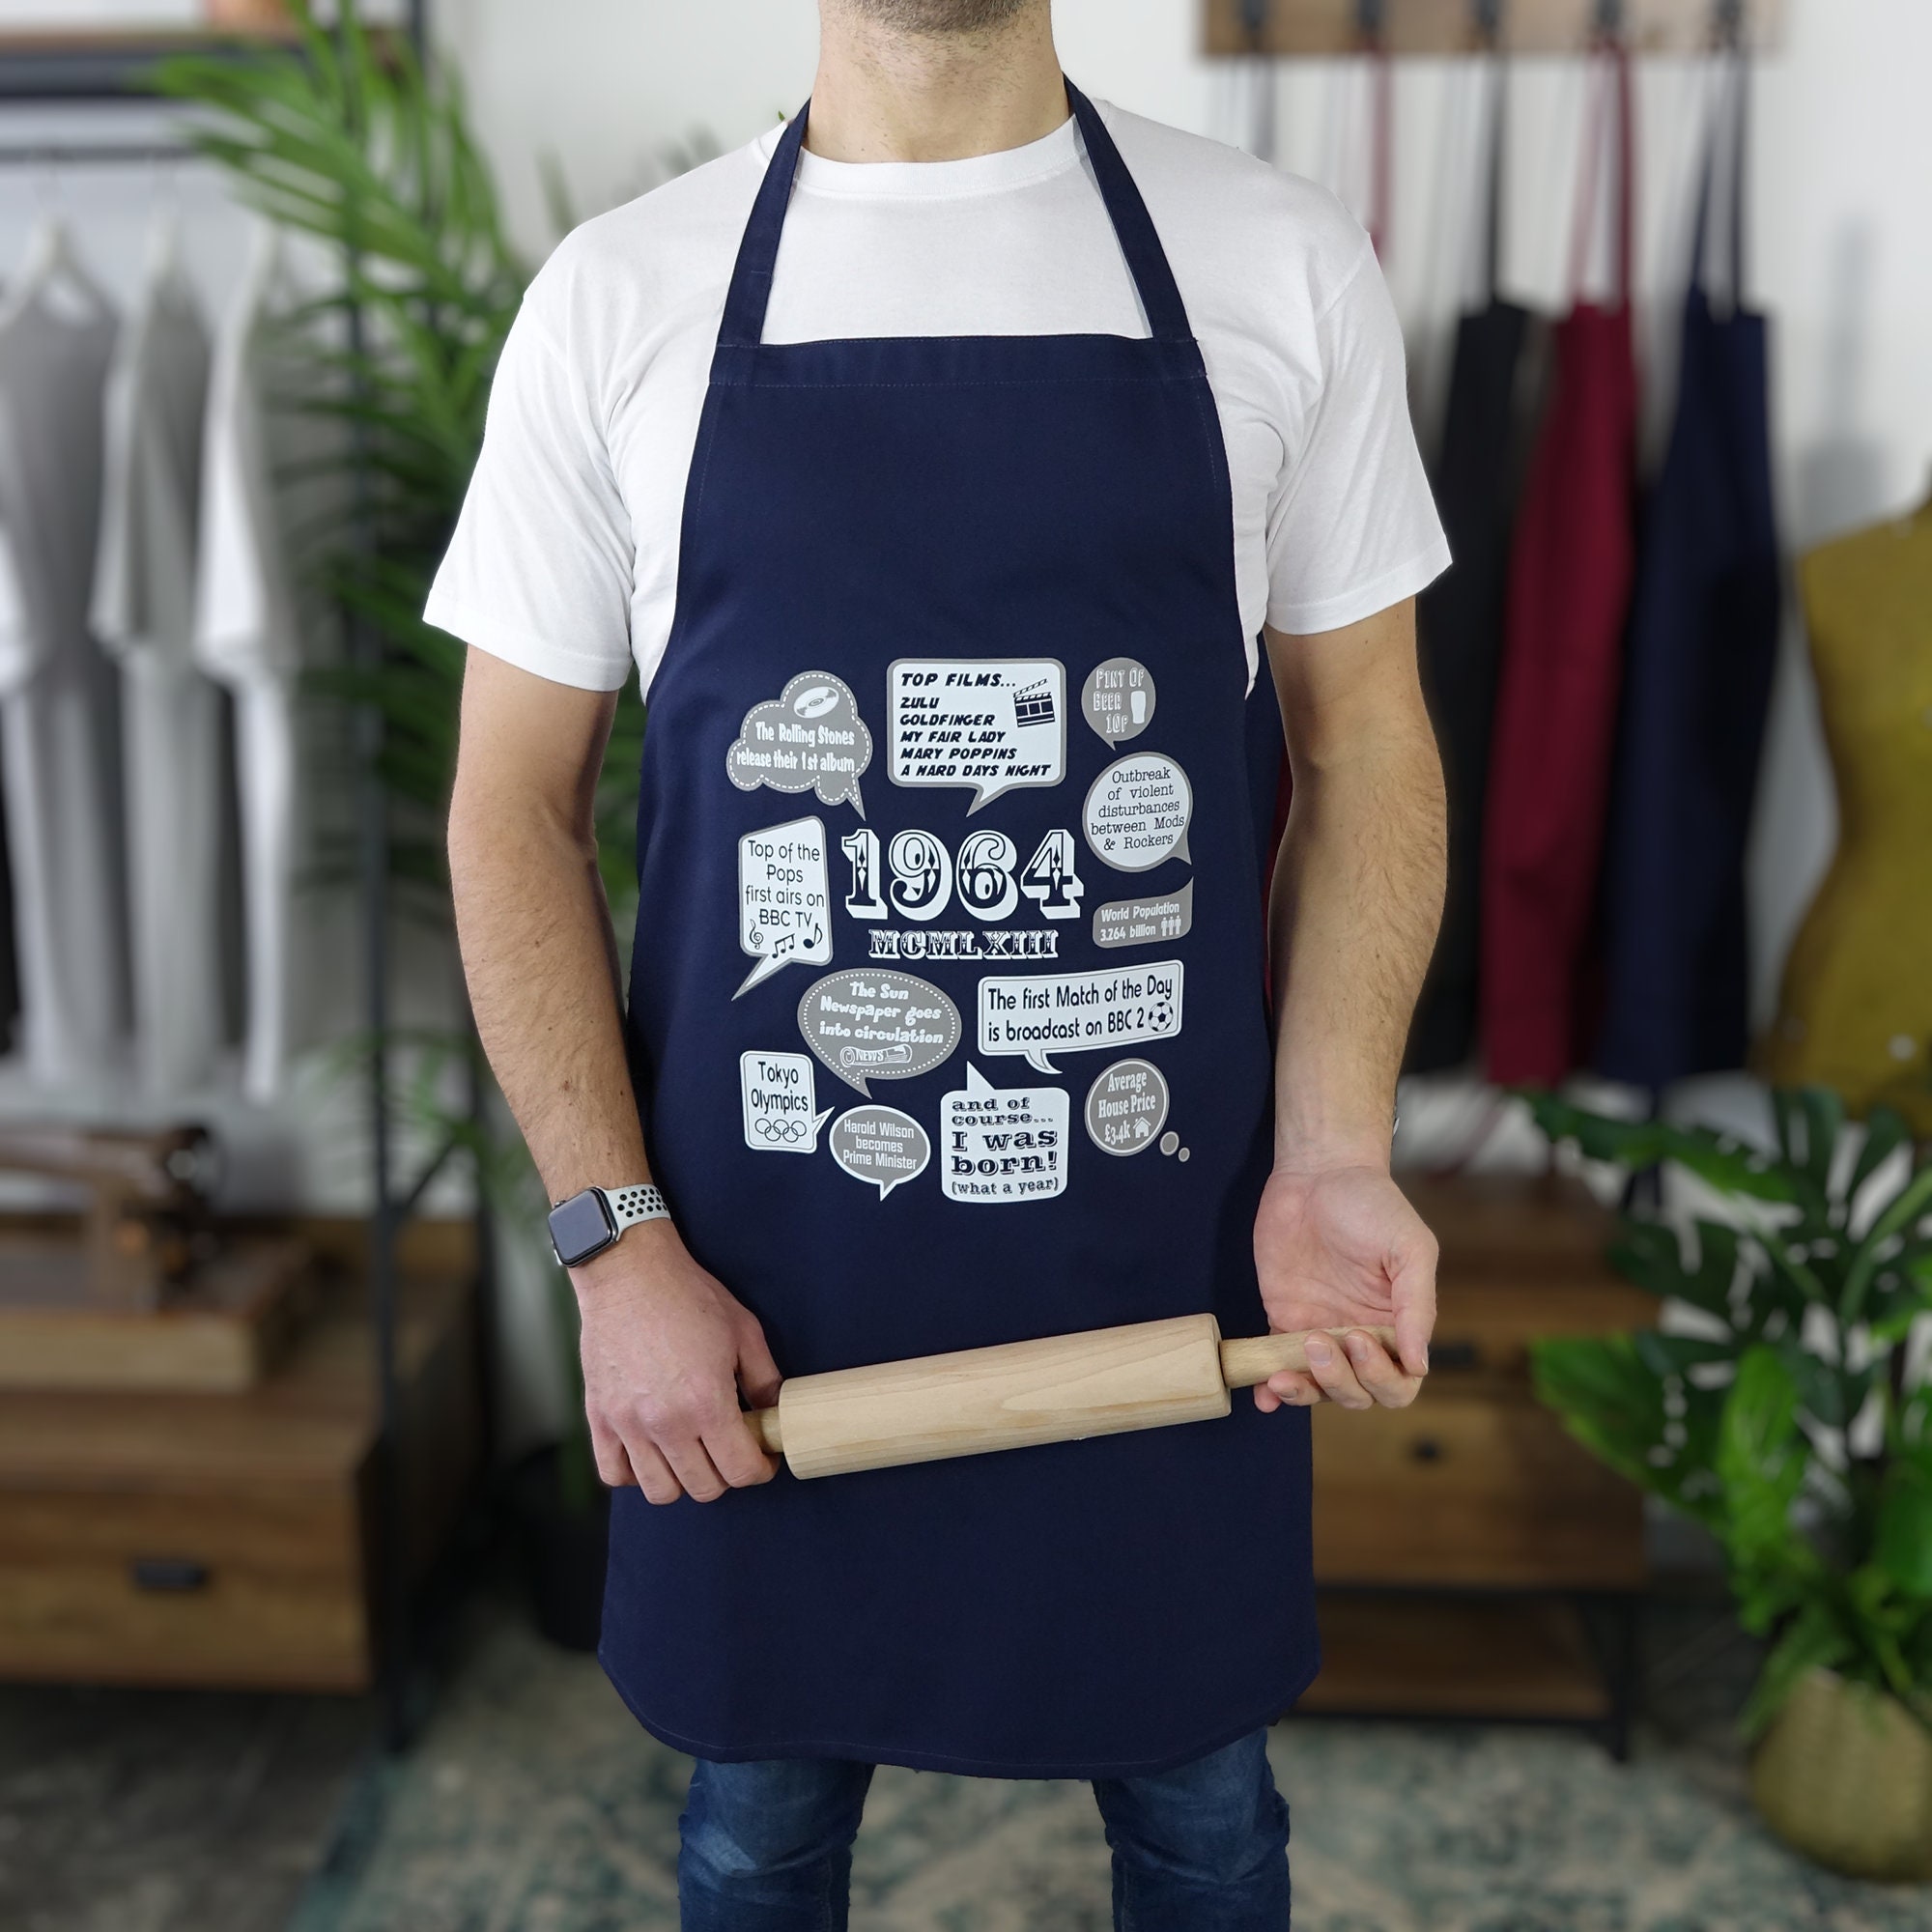  30th Birthday Gifts for Men Women, 1993 Happy 30th Birthday Gift  Ideas, 30th Chef Aprons for Men with 3 Pockets, Funny Cooking Aprons for 30  Years Old Men, Women, Husband, Wife